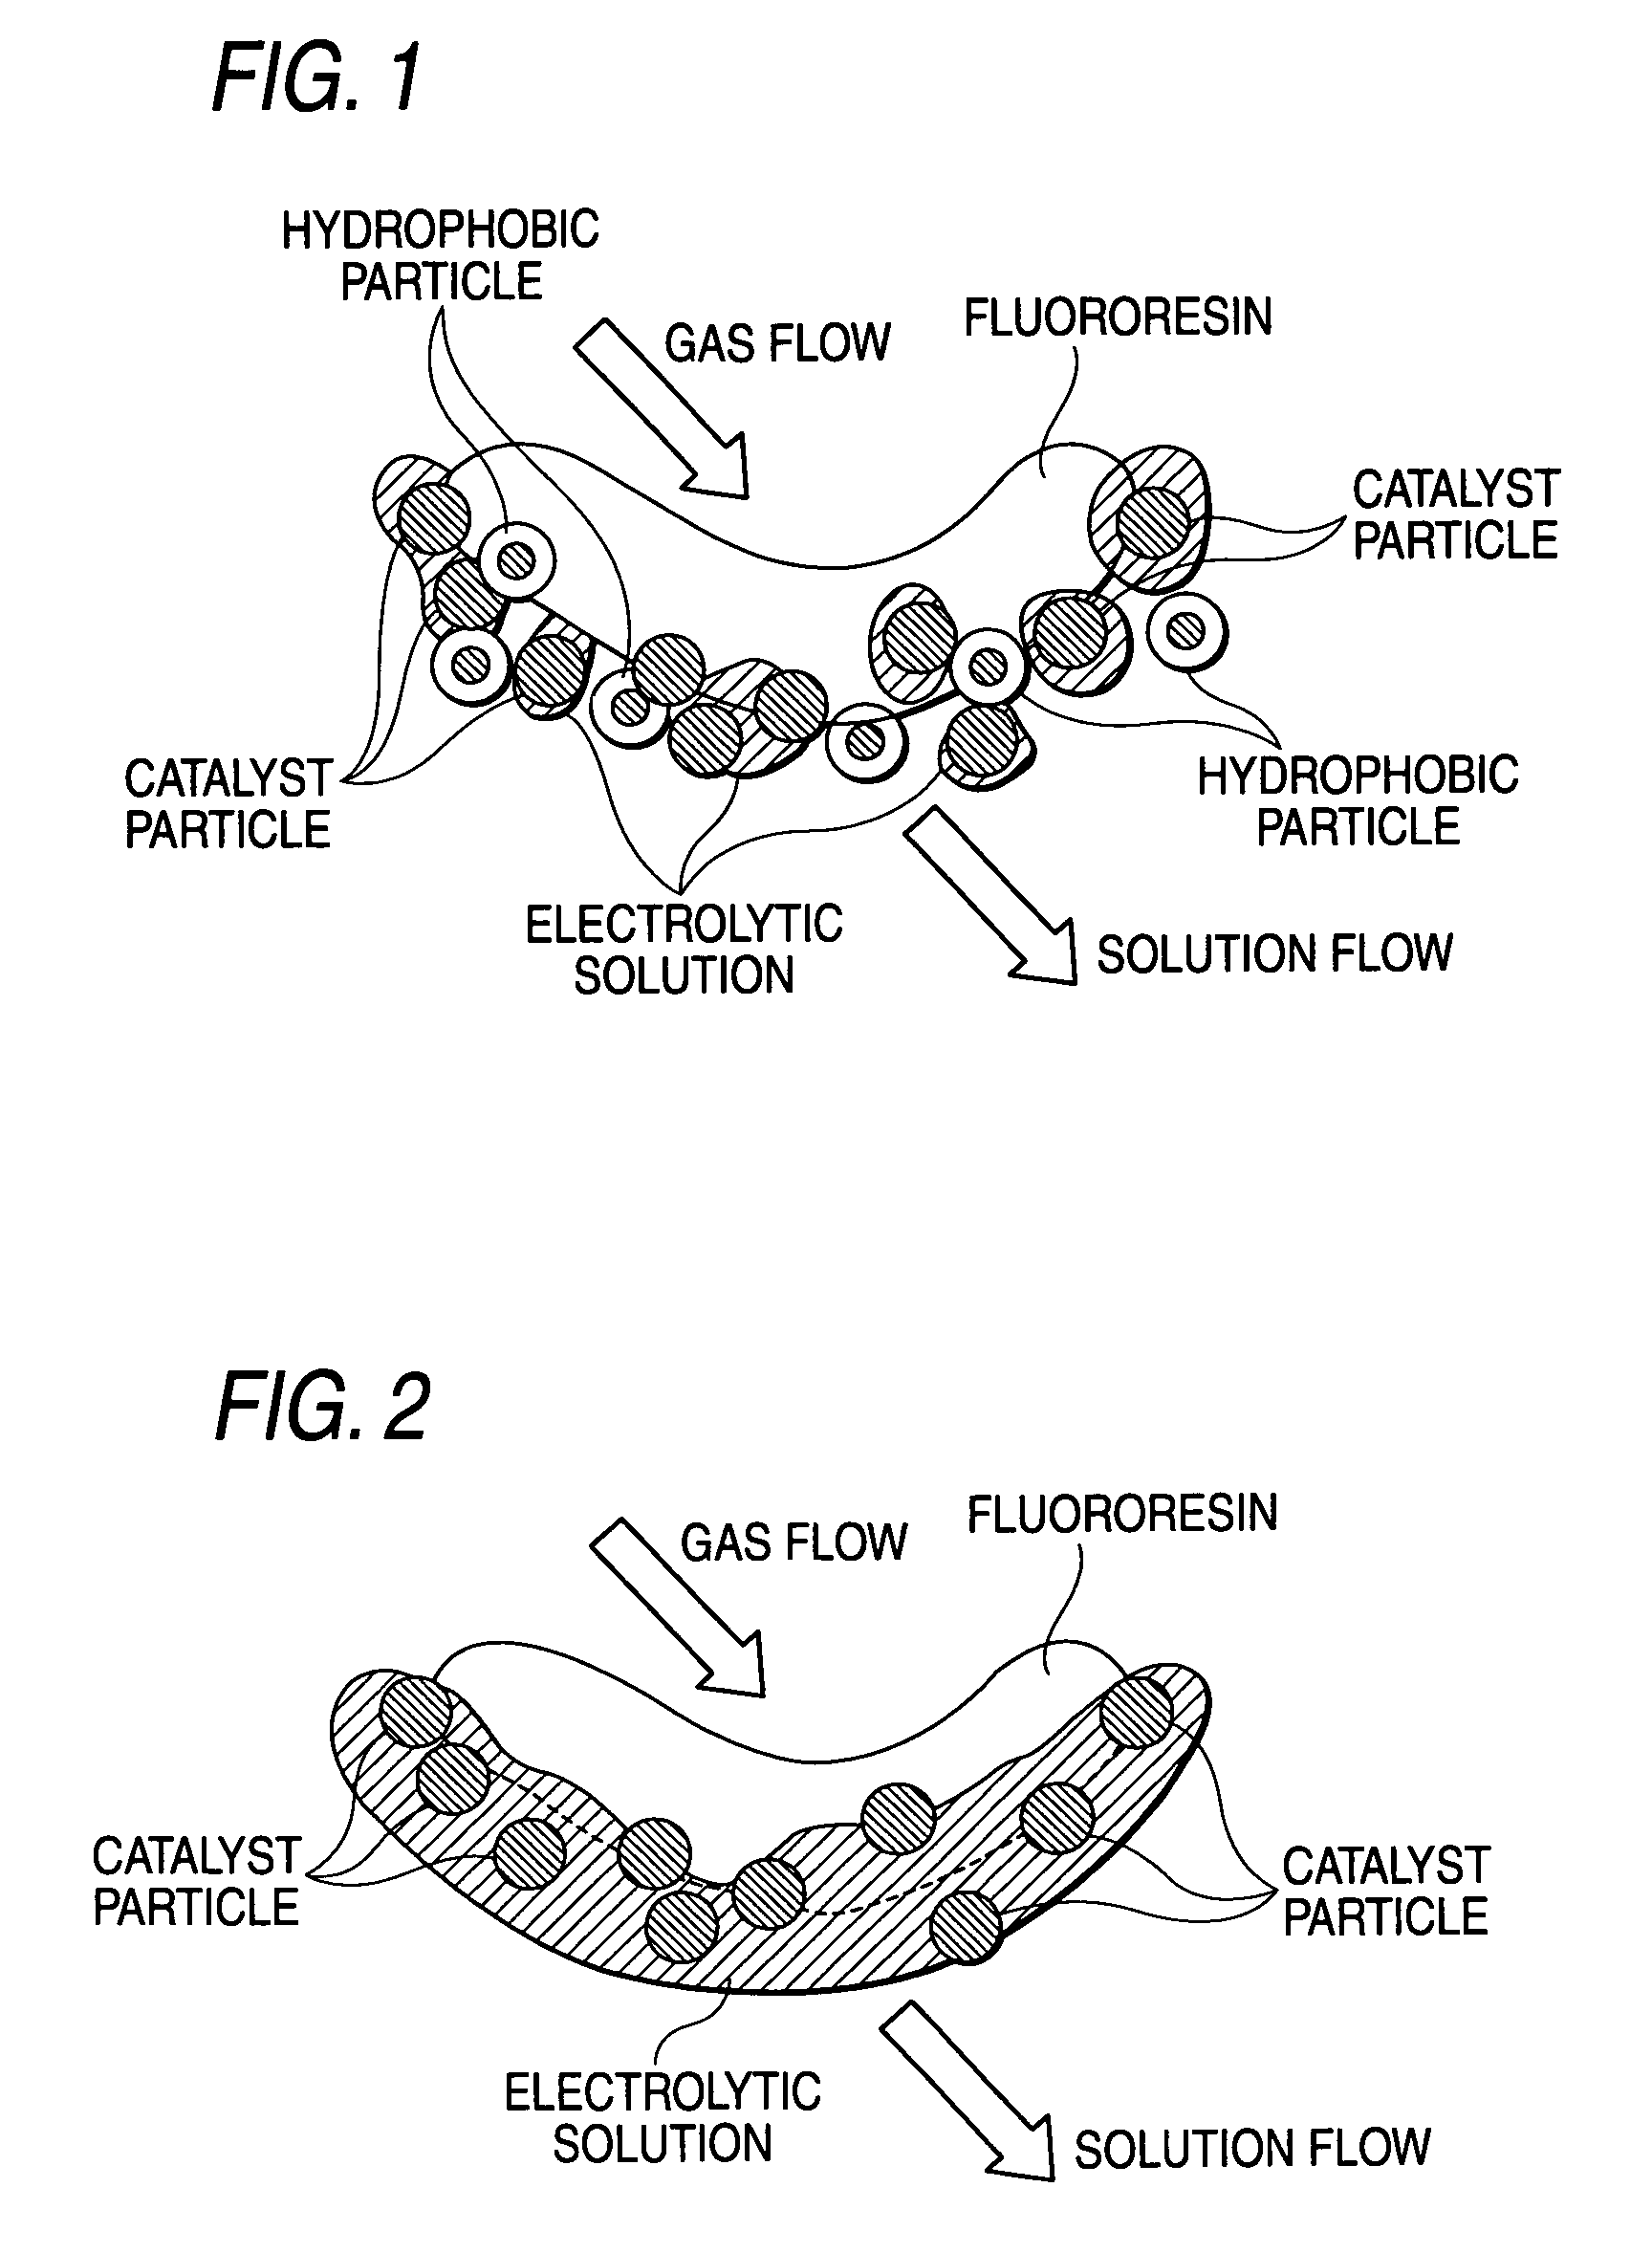 Oxygen-reducing gas diffusion cathode and method of sodium chloride electrolysis